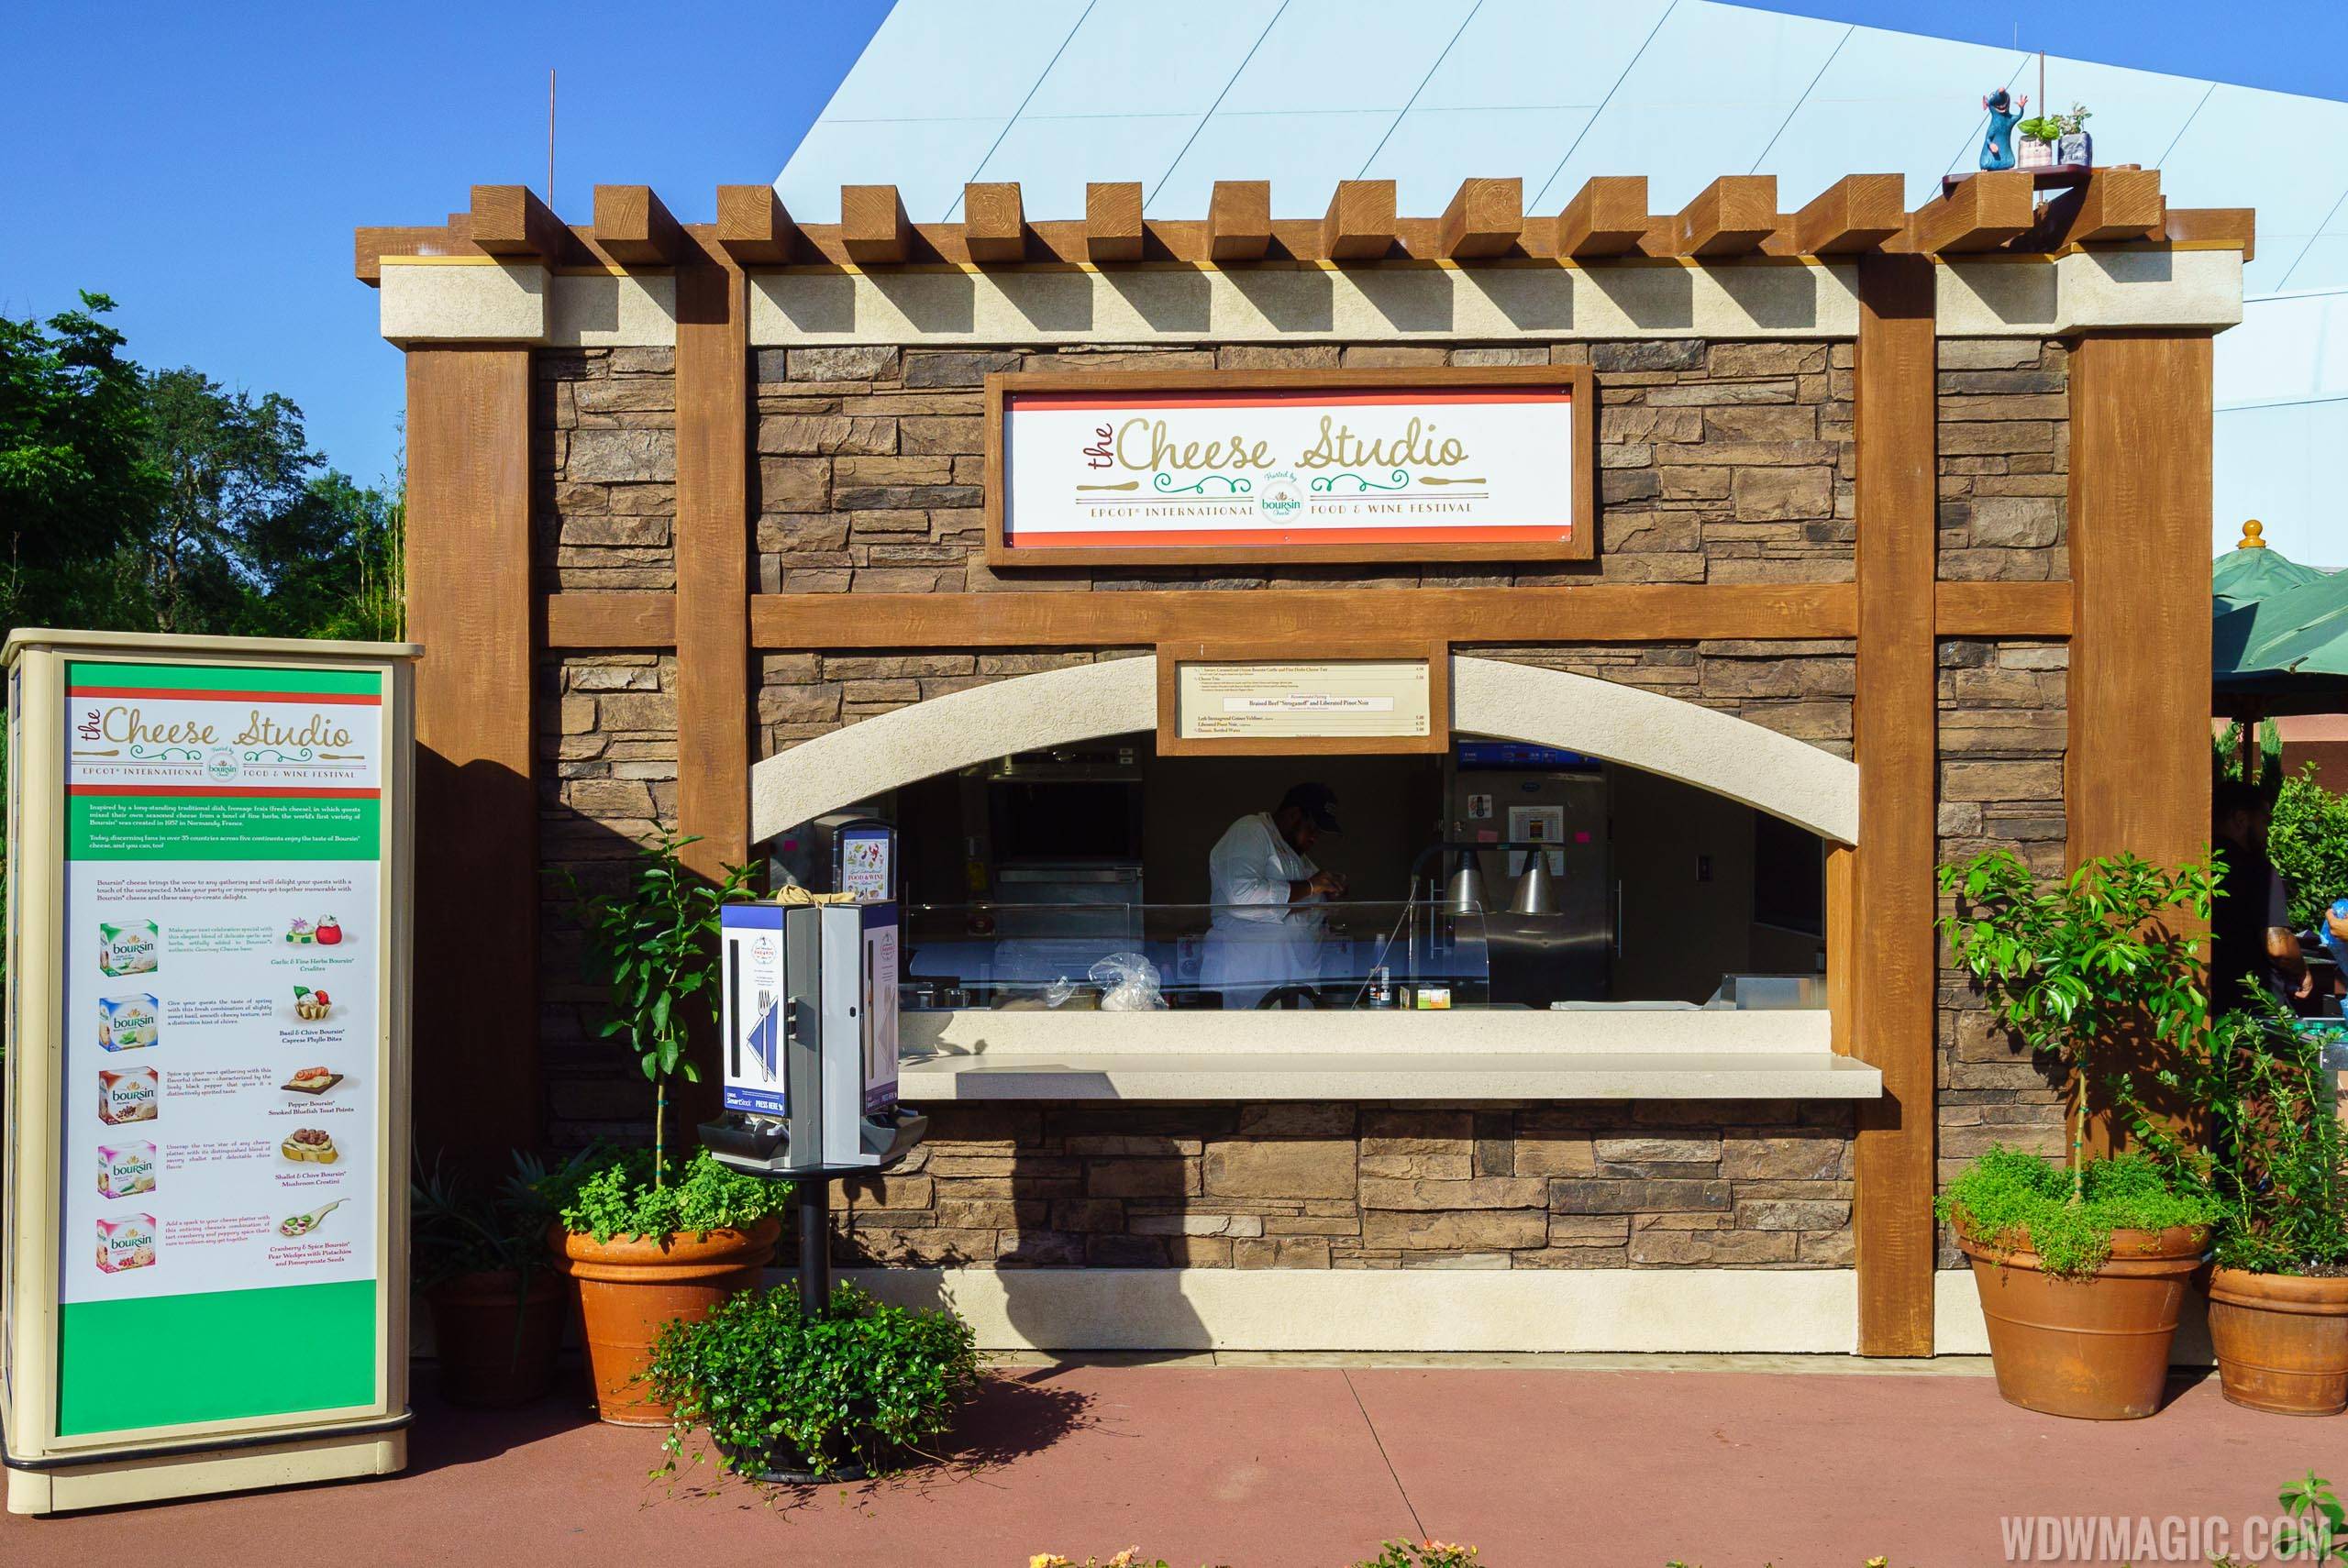 2017 Epcot Food and Wine Festival - Cheese Studio marketplace kiosk